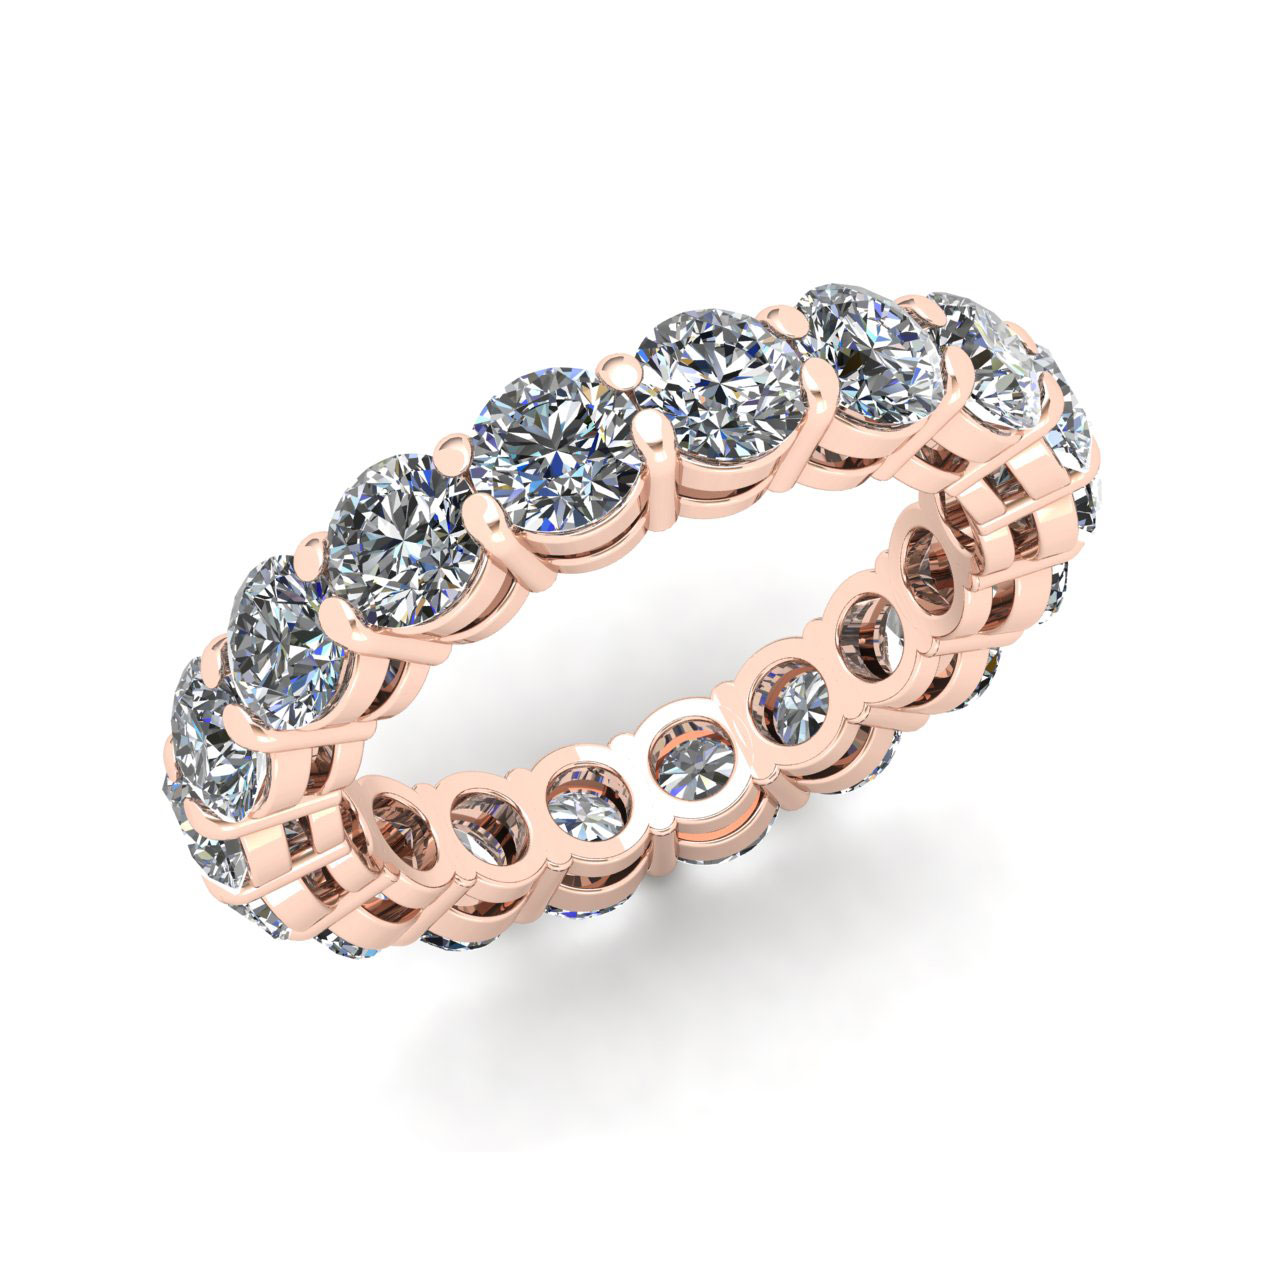 Jewel We Sell Natural 4.50Ct Round Diamond Shared Prong Gallery Ladies Anniversary Wedding Eternity Band Ring Solid 18k Rose Gold G SI1